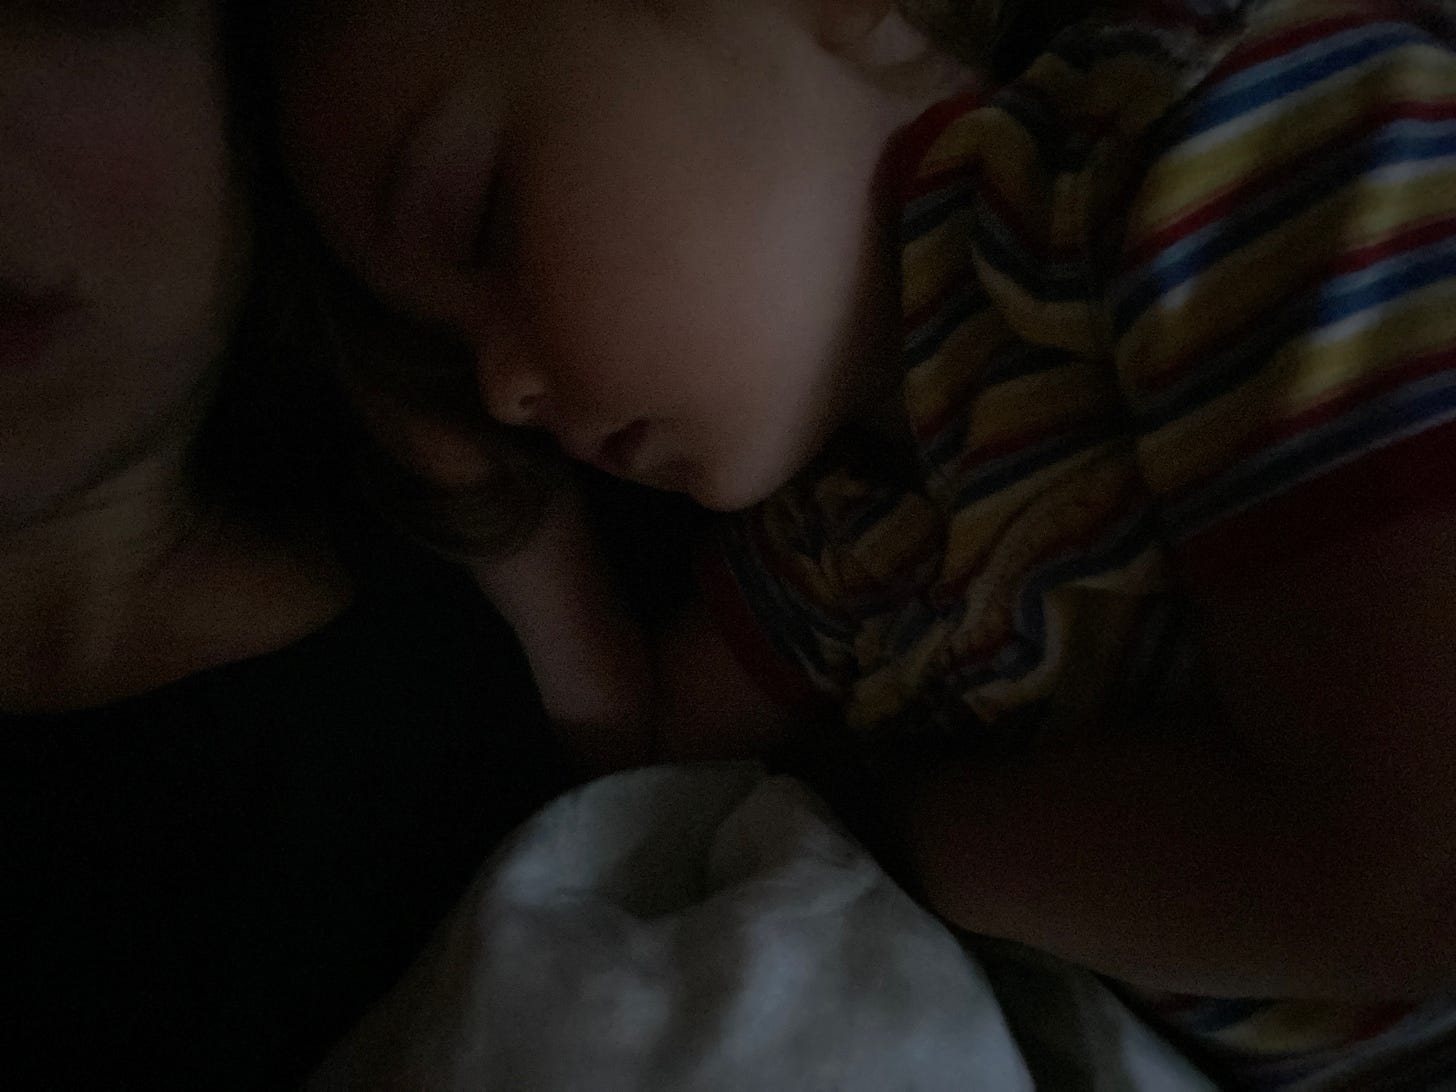 A blurry portrait of a sleeping toddler lying on the chest of their mom, whose face is only partially in the frame.